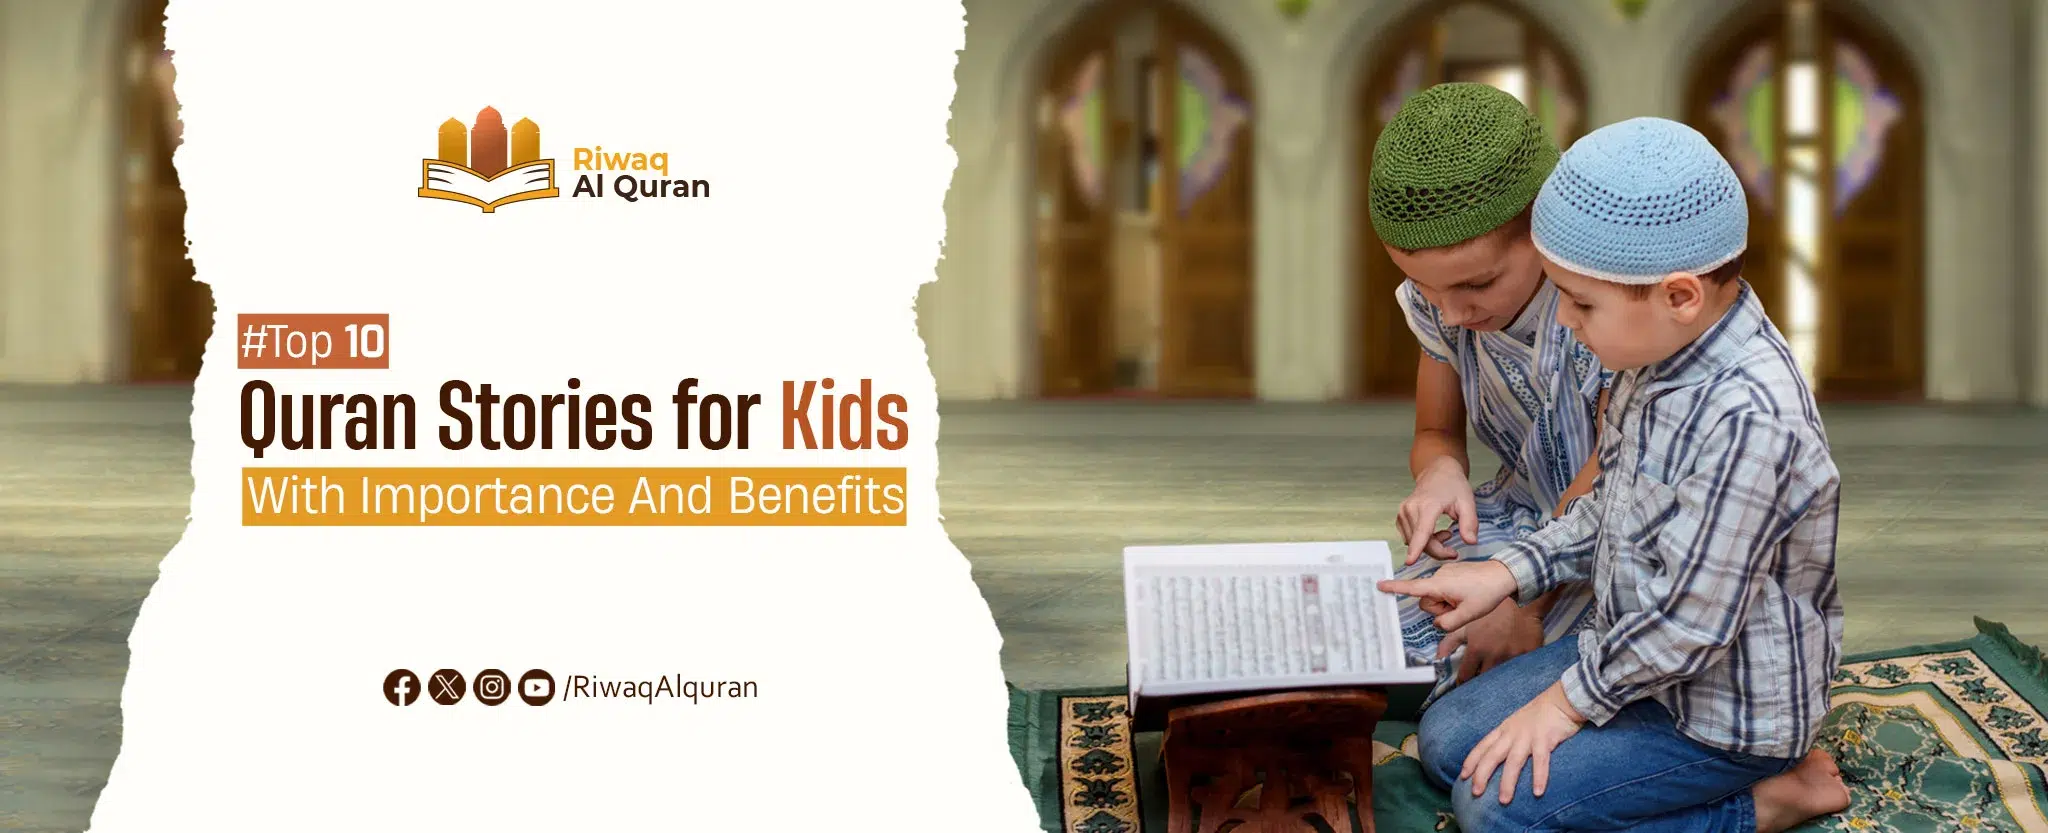 Top 10 Quran Stories for Kids With Importance And Benefits